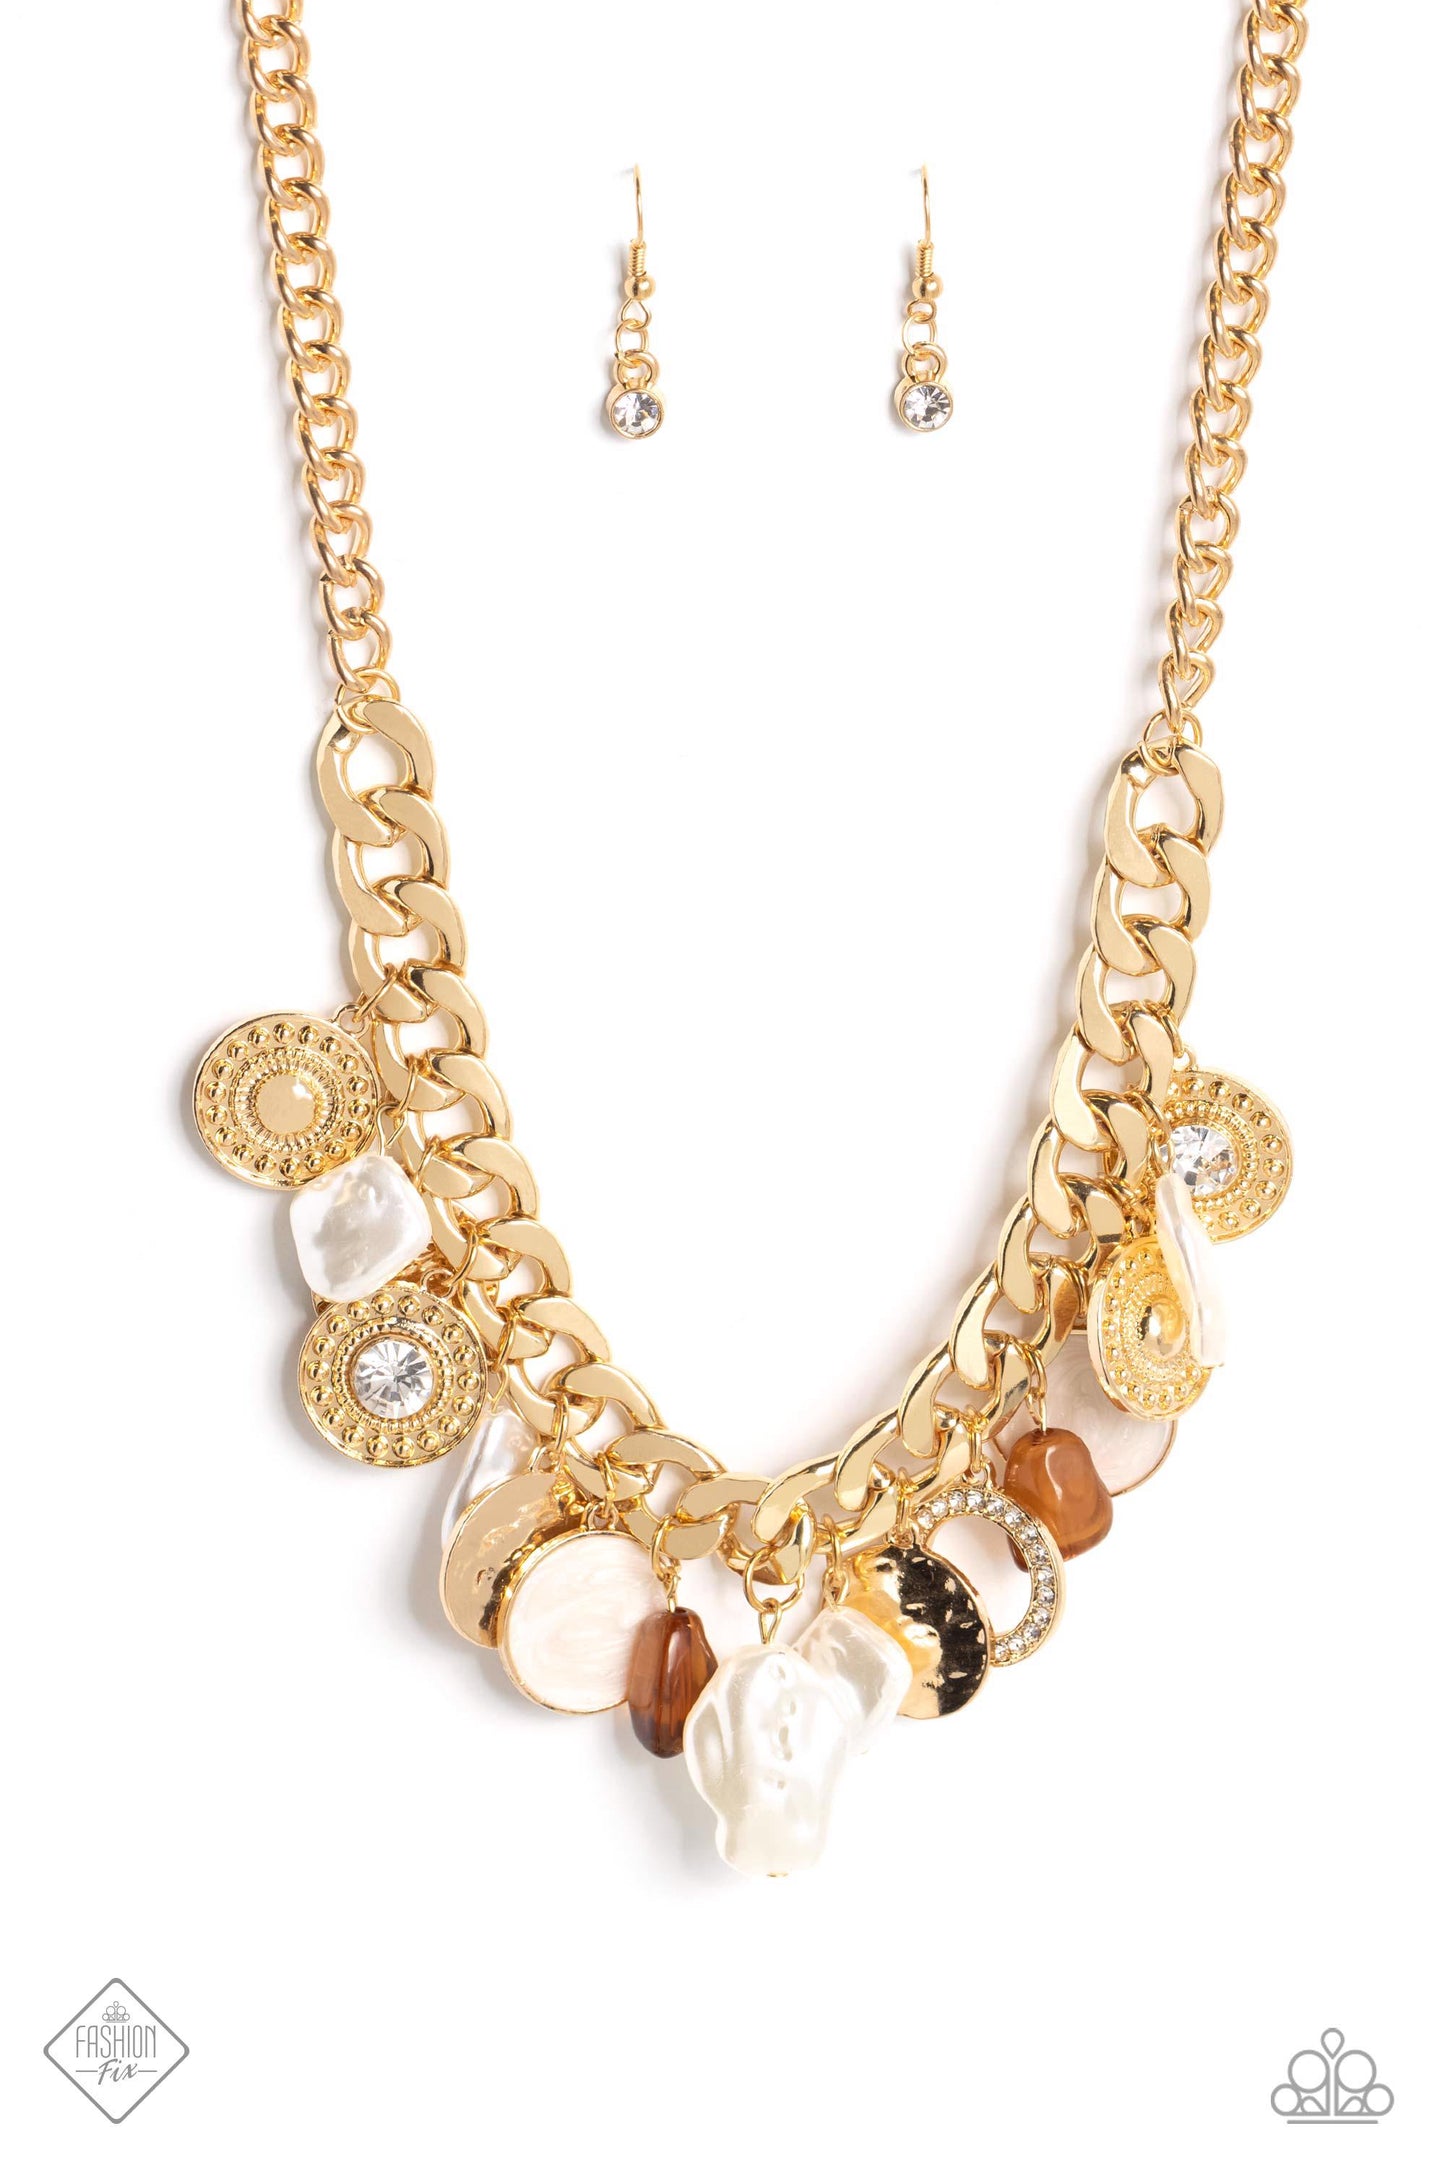 Now SEA Here Paparazzi Accessories Necklace with Earrings Gold